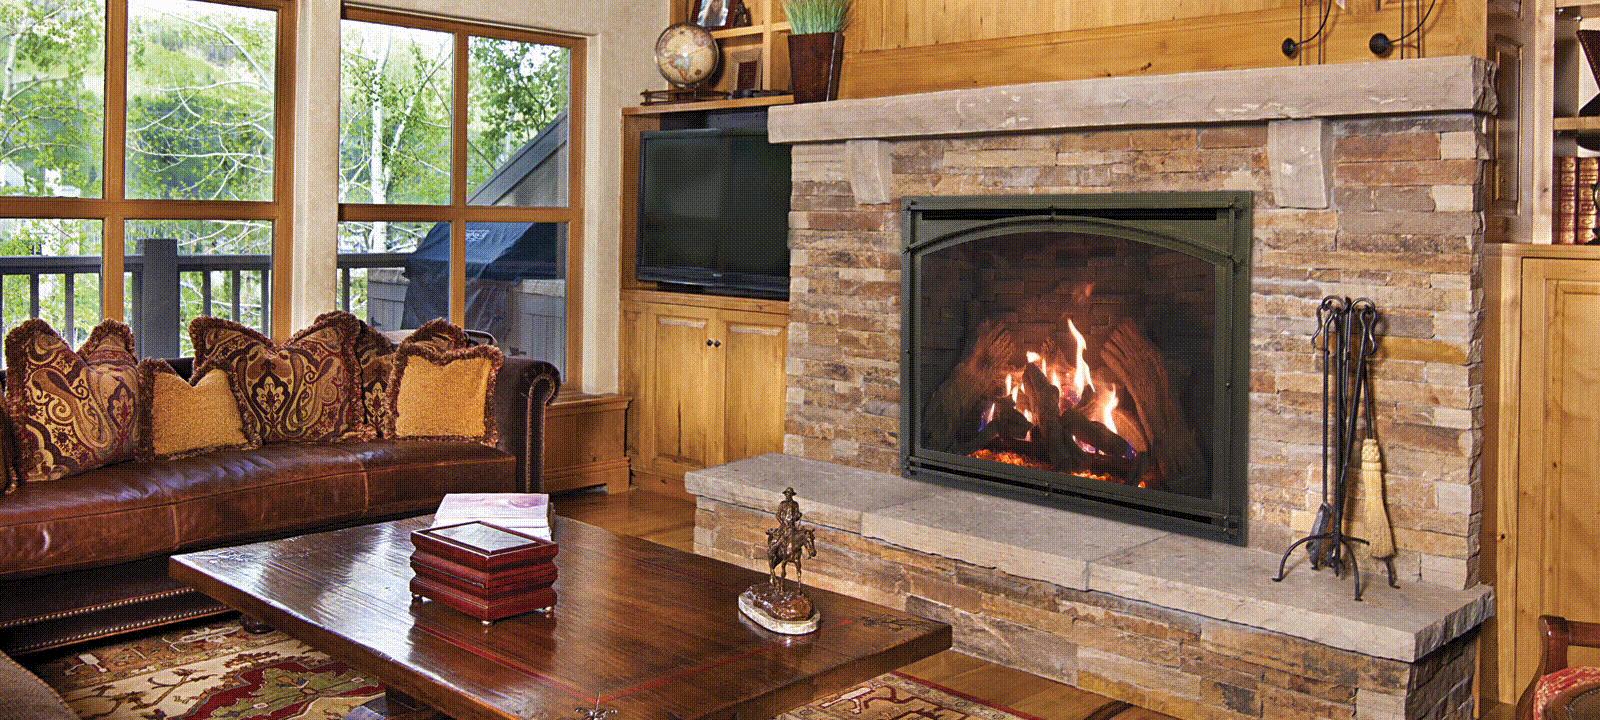 36 Wood Burning Fireplace In Living Room